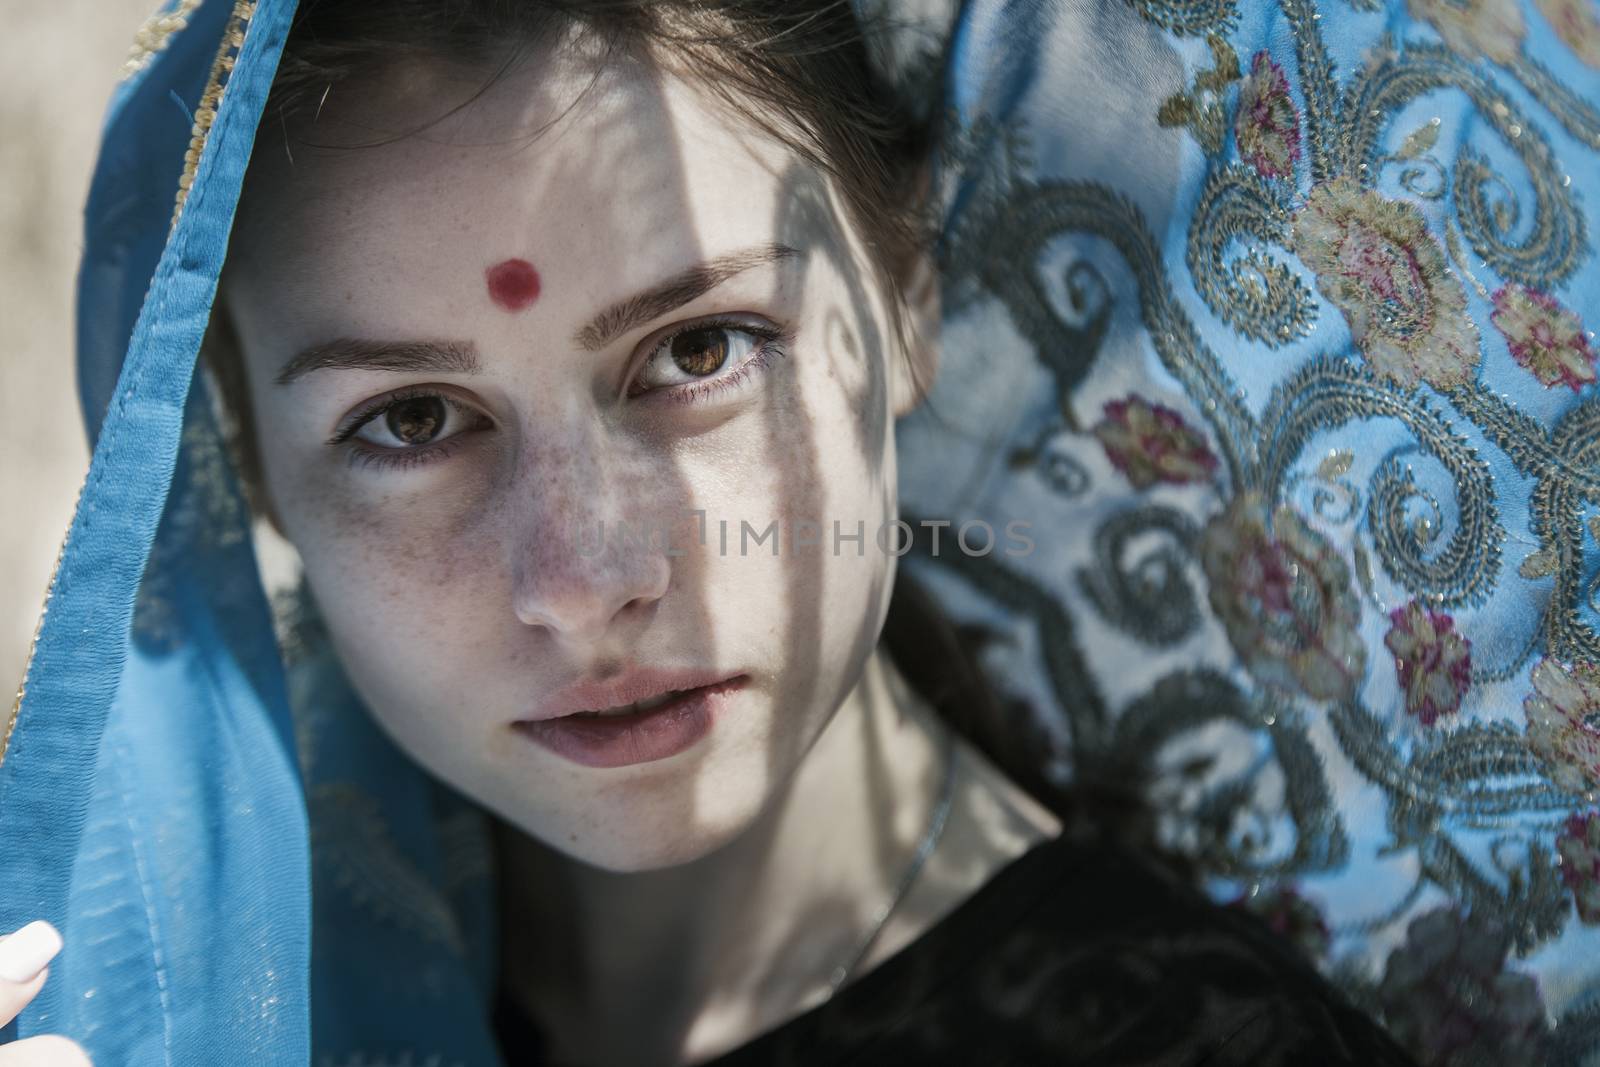 The girl the European covered with a sari, a faces portrait